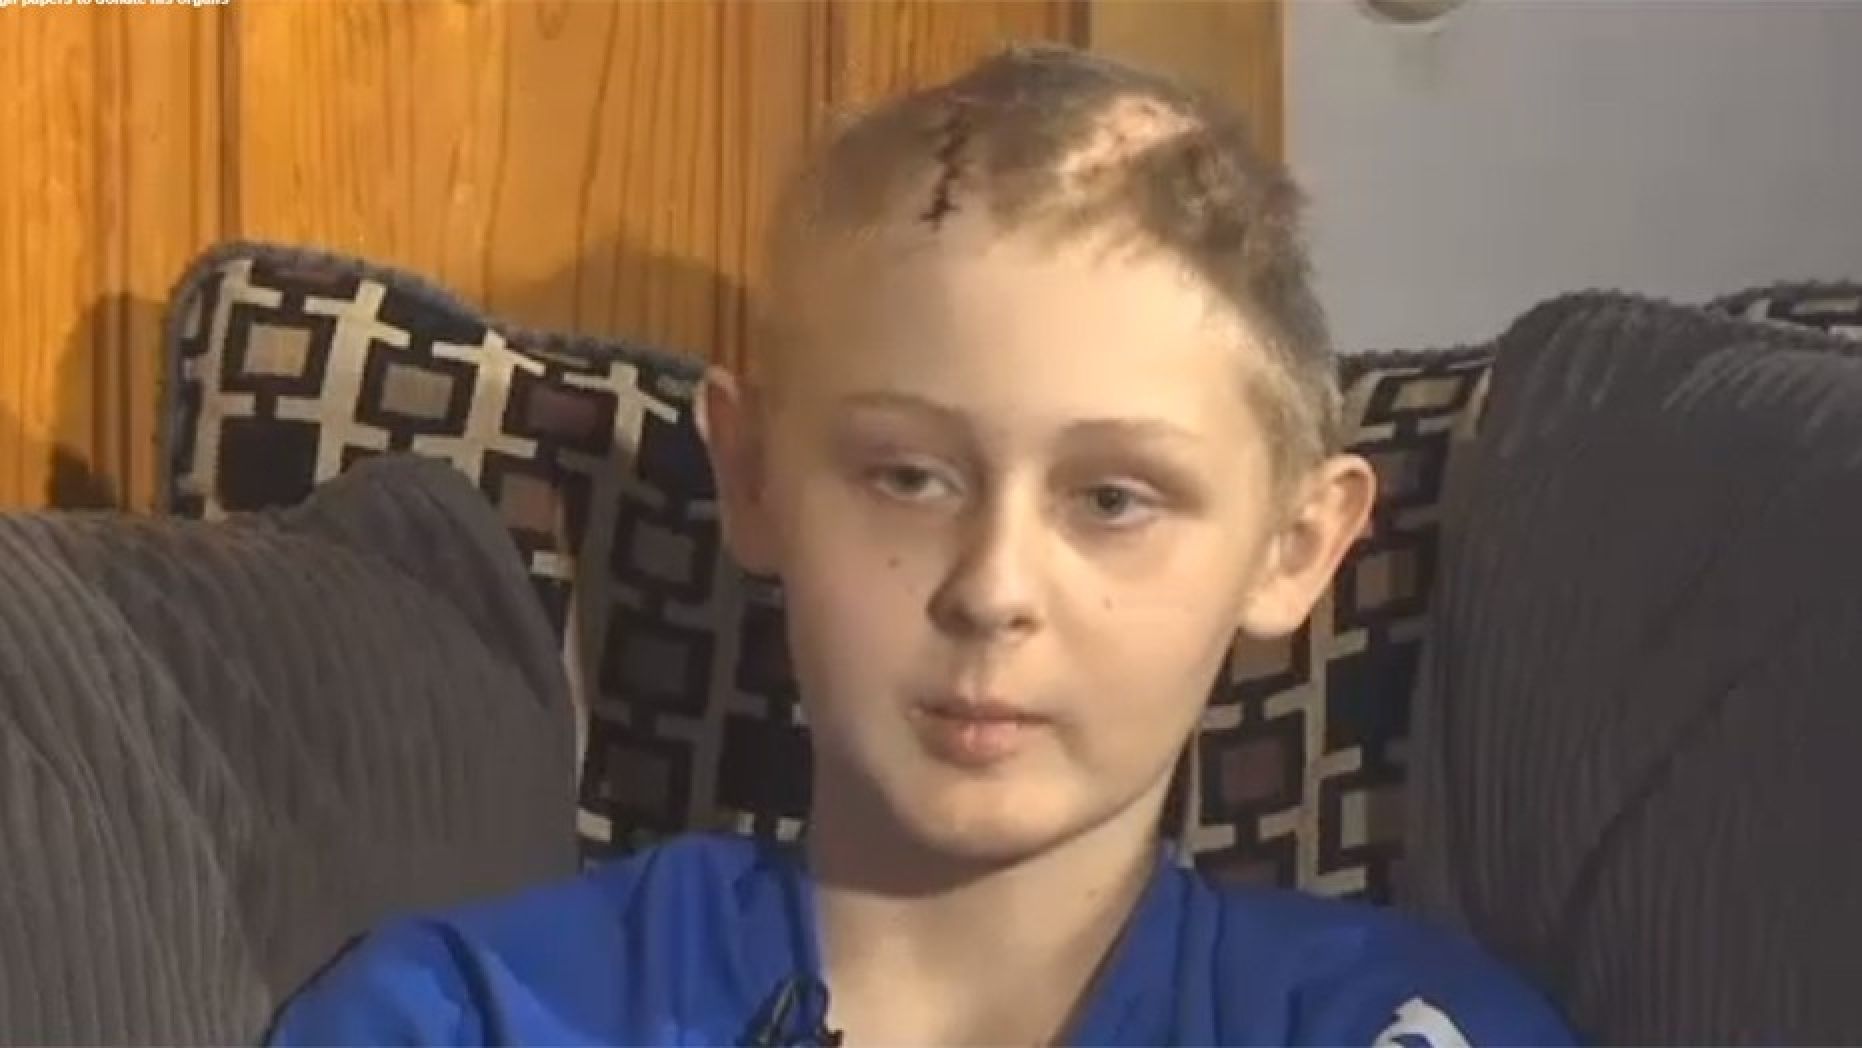 FOX: Boy, 13, regains consciousness after parents sign papers to donate his organs